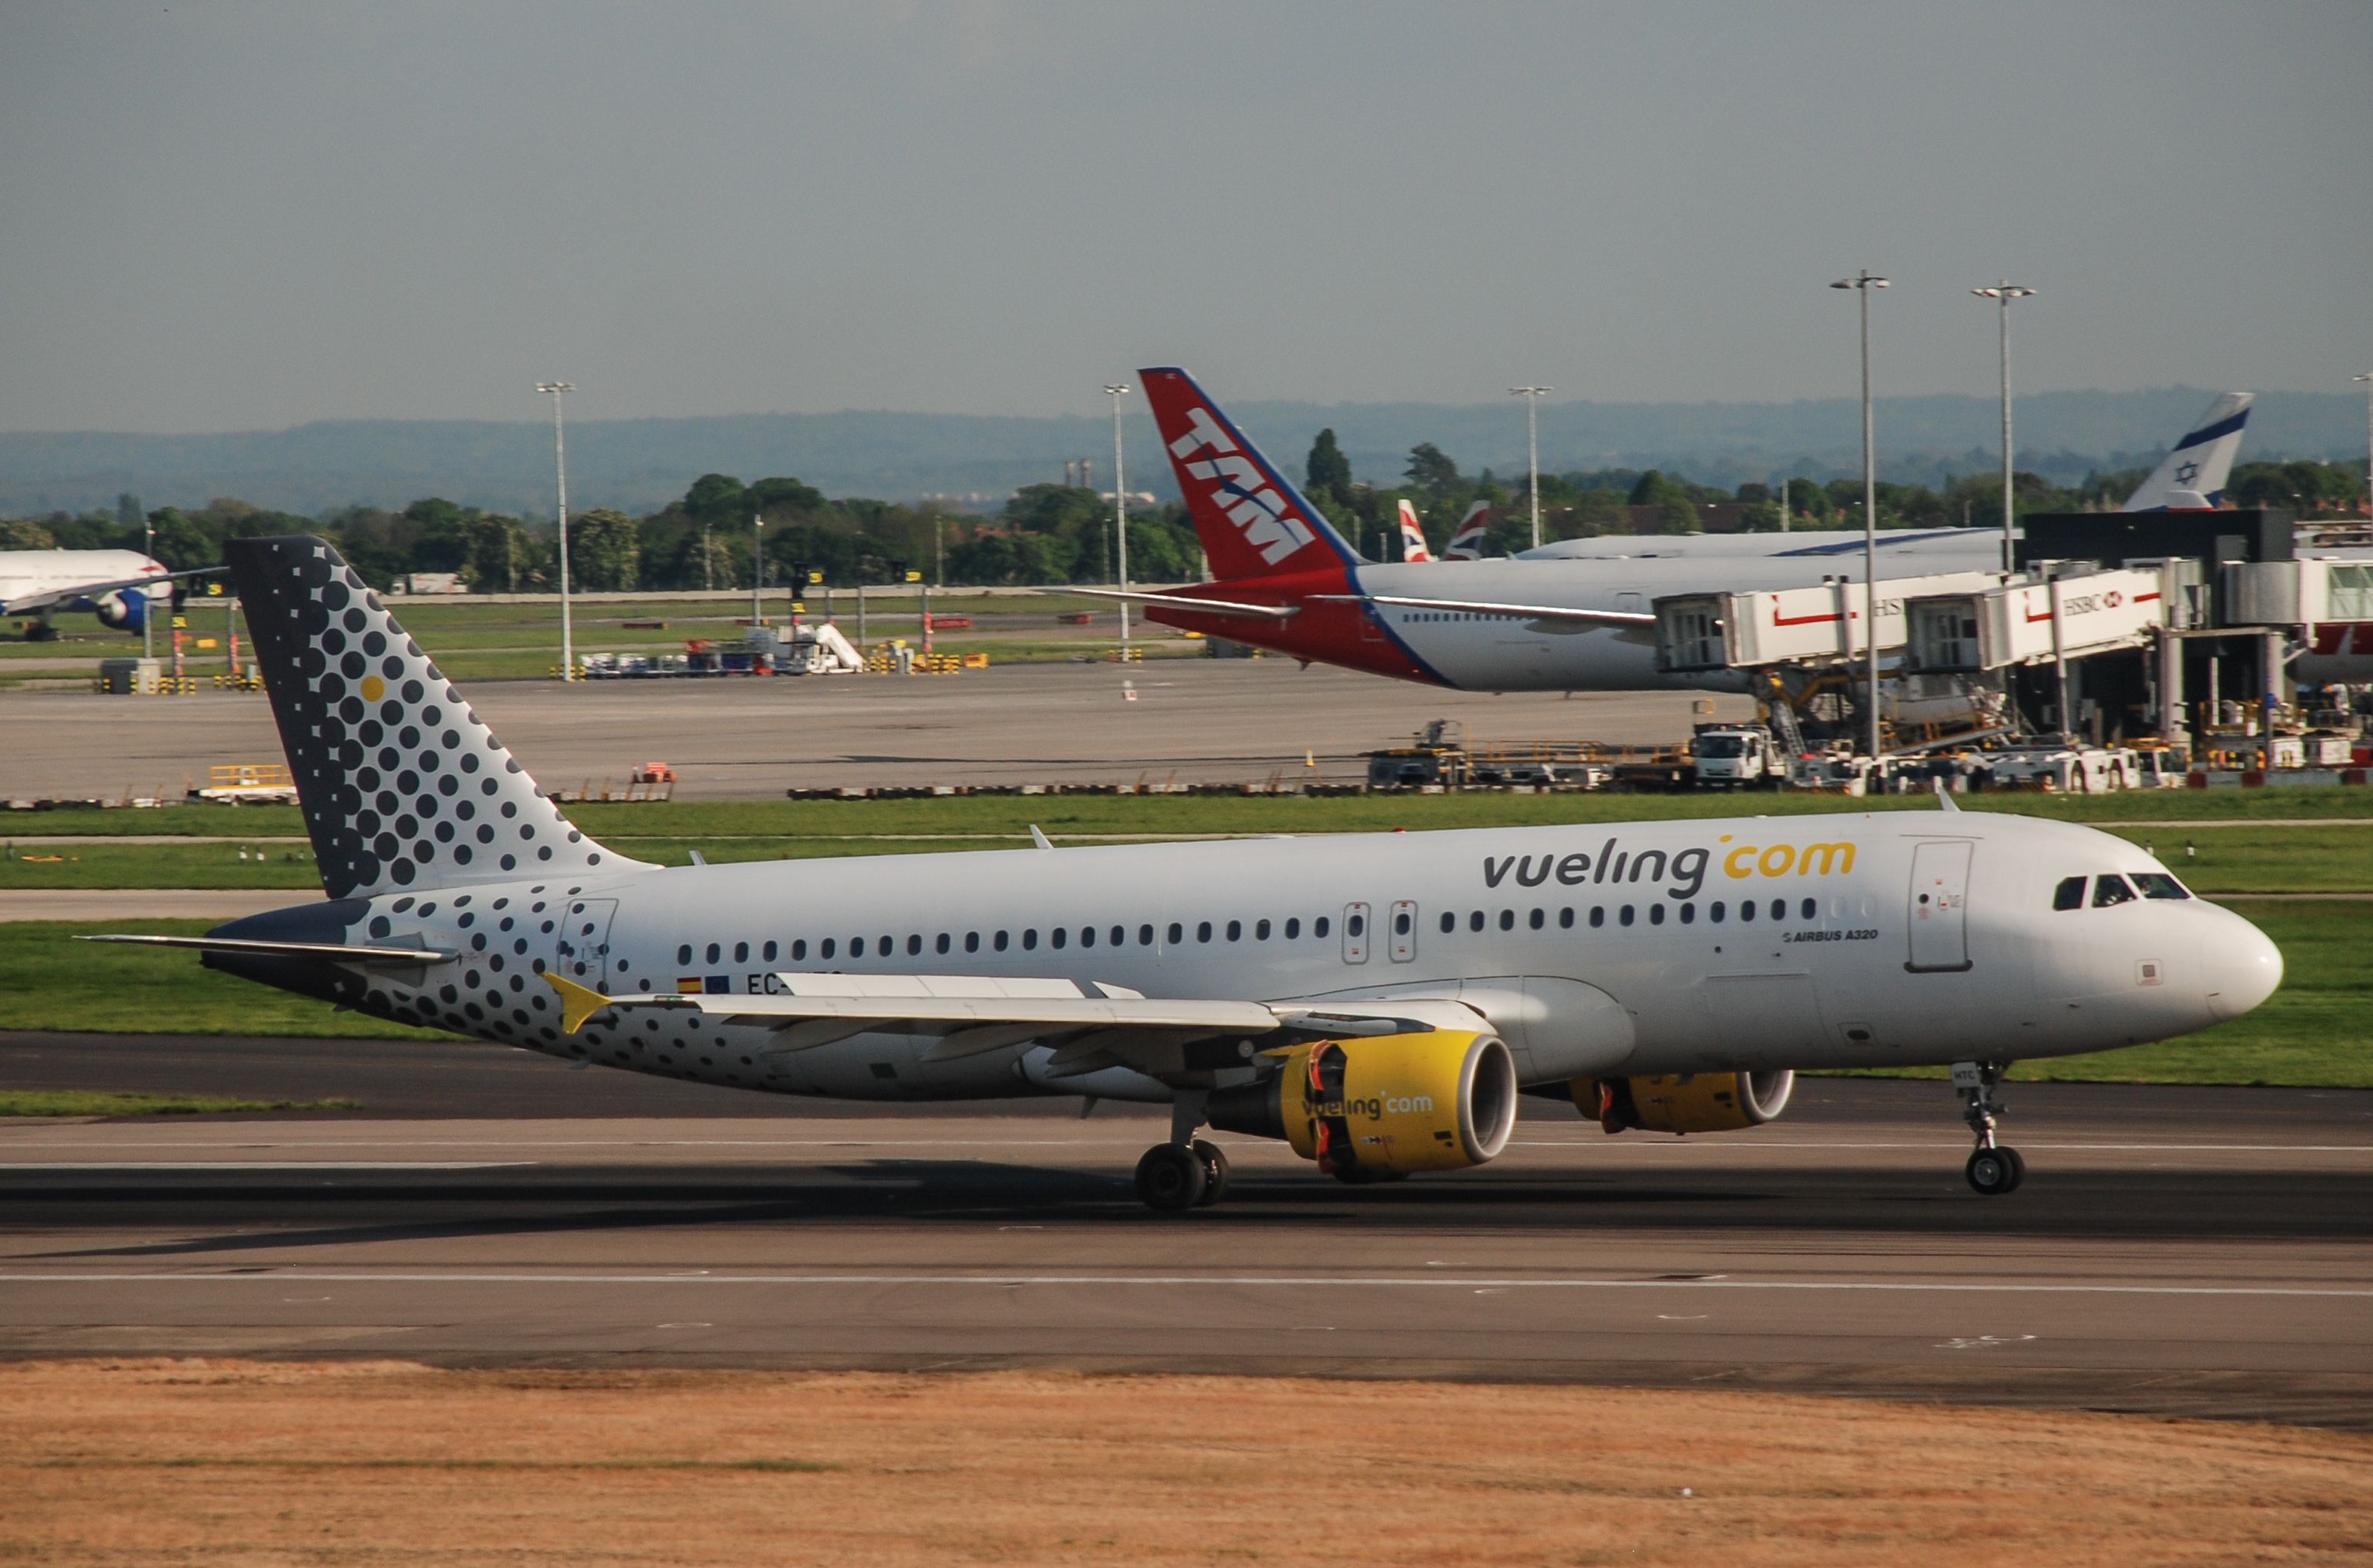 EC-HTC/ECHTC Vueling Airlines Airbus A320-214 Photo by Ayronautica - AVSpotters.com